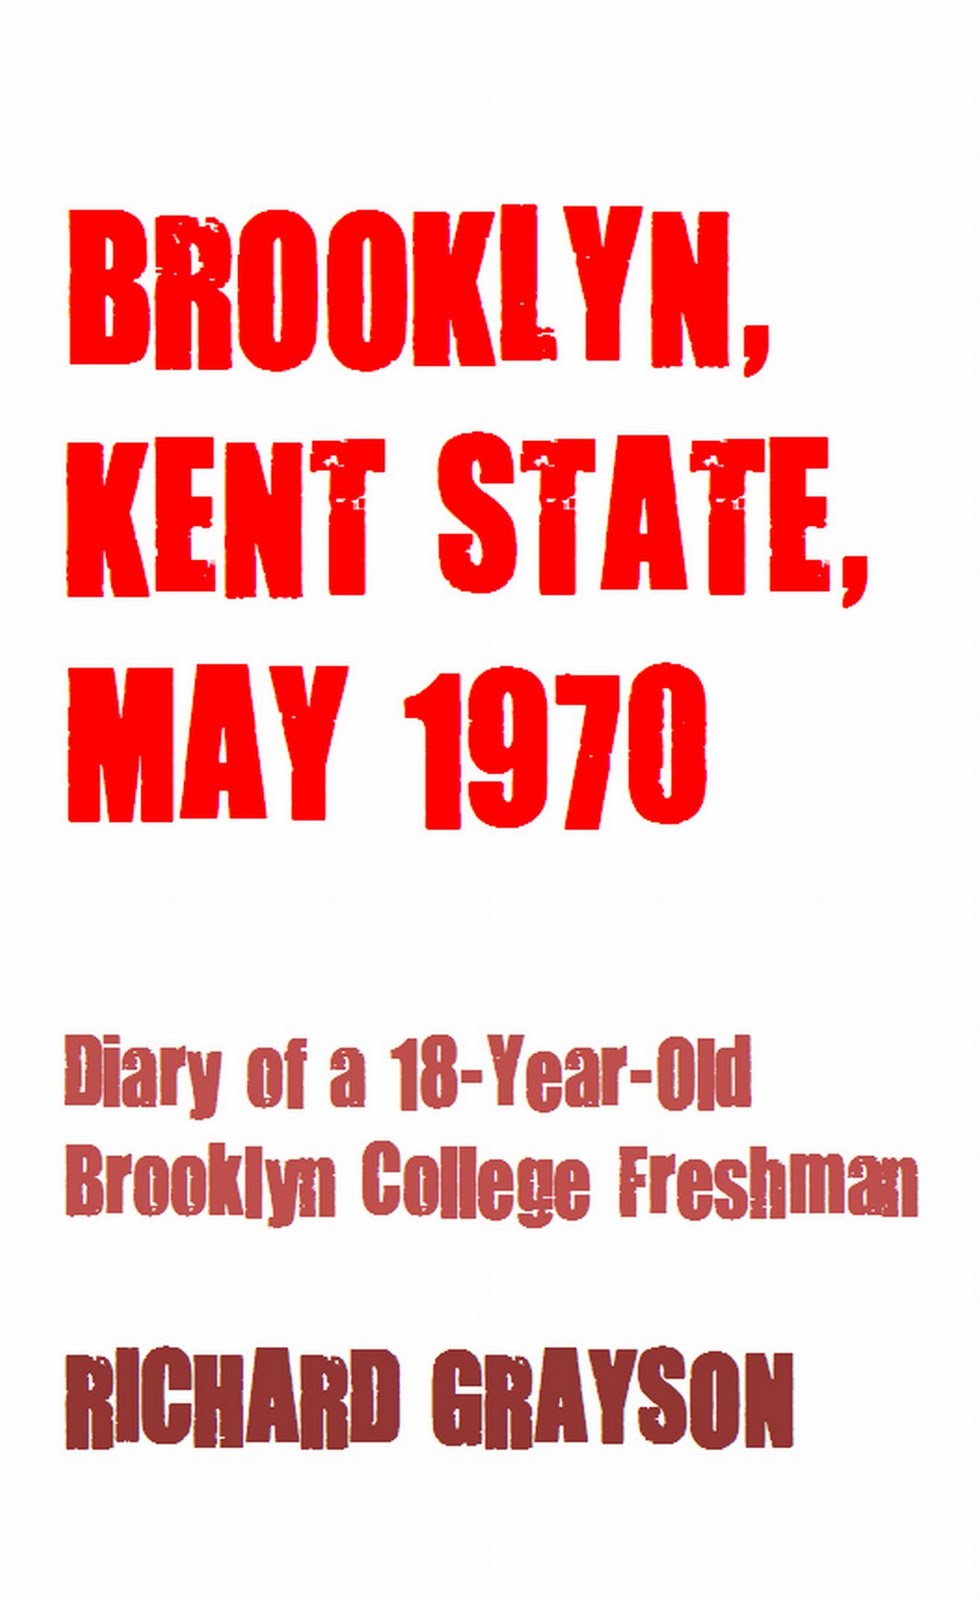 BROOKLYN, KENT STATE, MAY 1970: Diary of an 18-Year-Old College Freshman (The Grayson Diaries) Richard Grayson